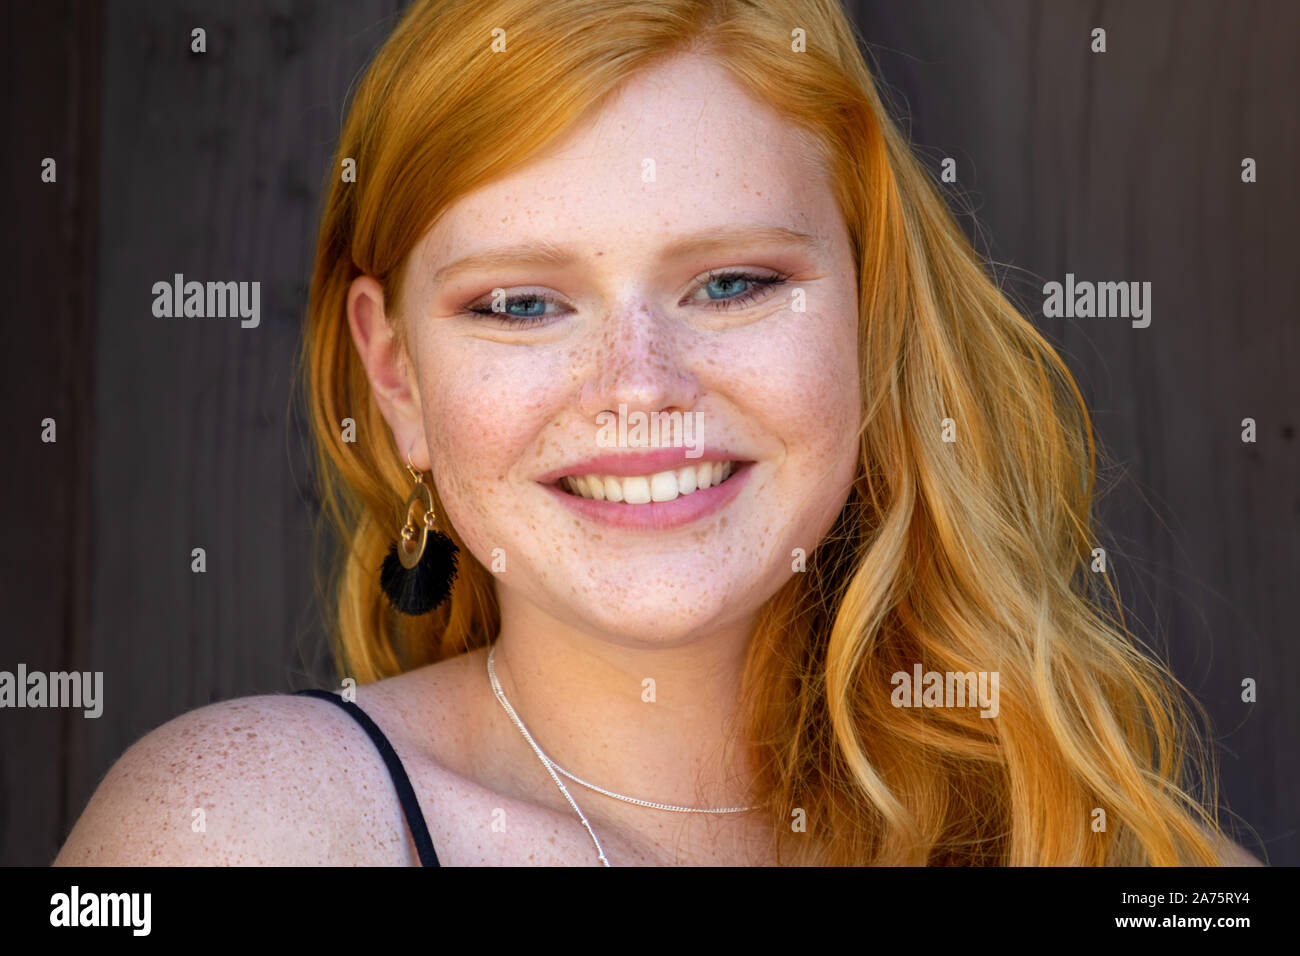 Portrait of a gorgeous smiling teenage girl with red hair and freckles Stock Photo